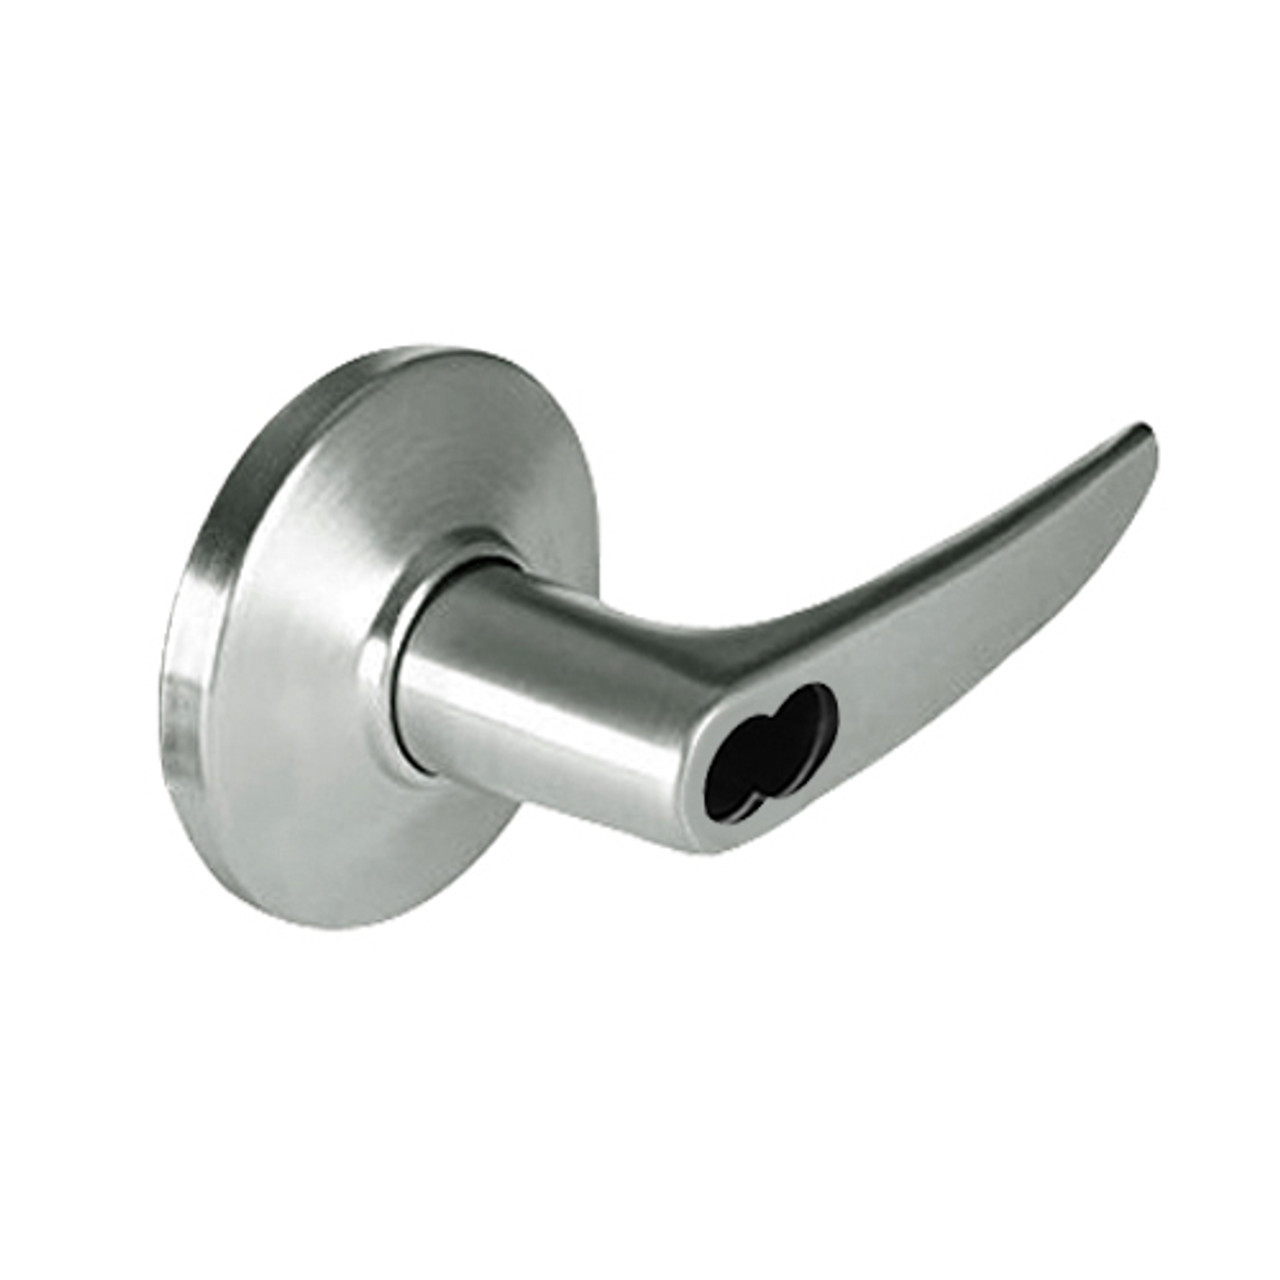 9K37HJ16DSTK619 Best 9K Series Hotel Cylindrical Lever Locks with Curved without Return Lever Design Accept 7 Pin Best Core in Satin Nickel